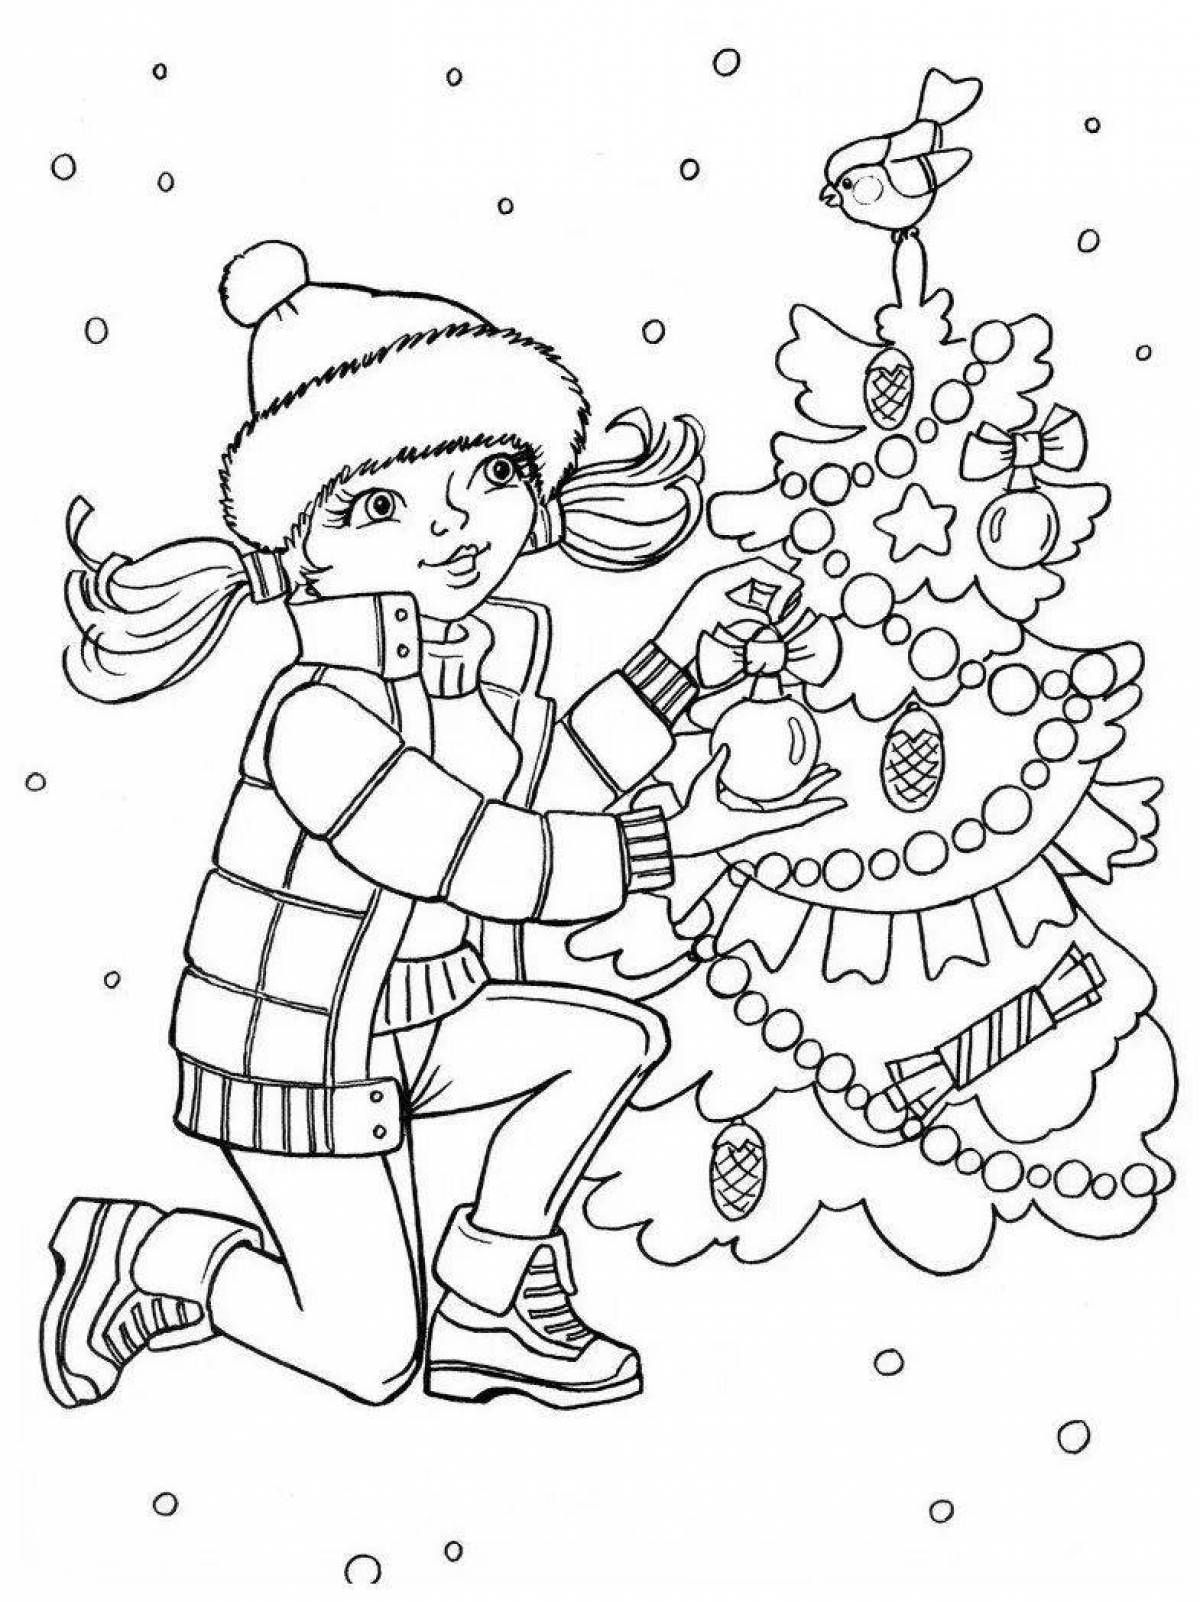 Blessed Christmas coloring book for 6 year old girls